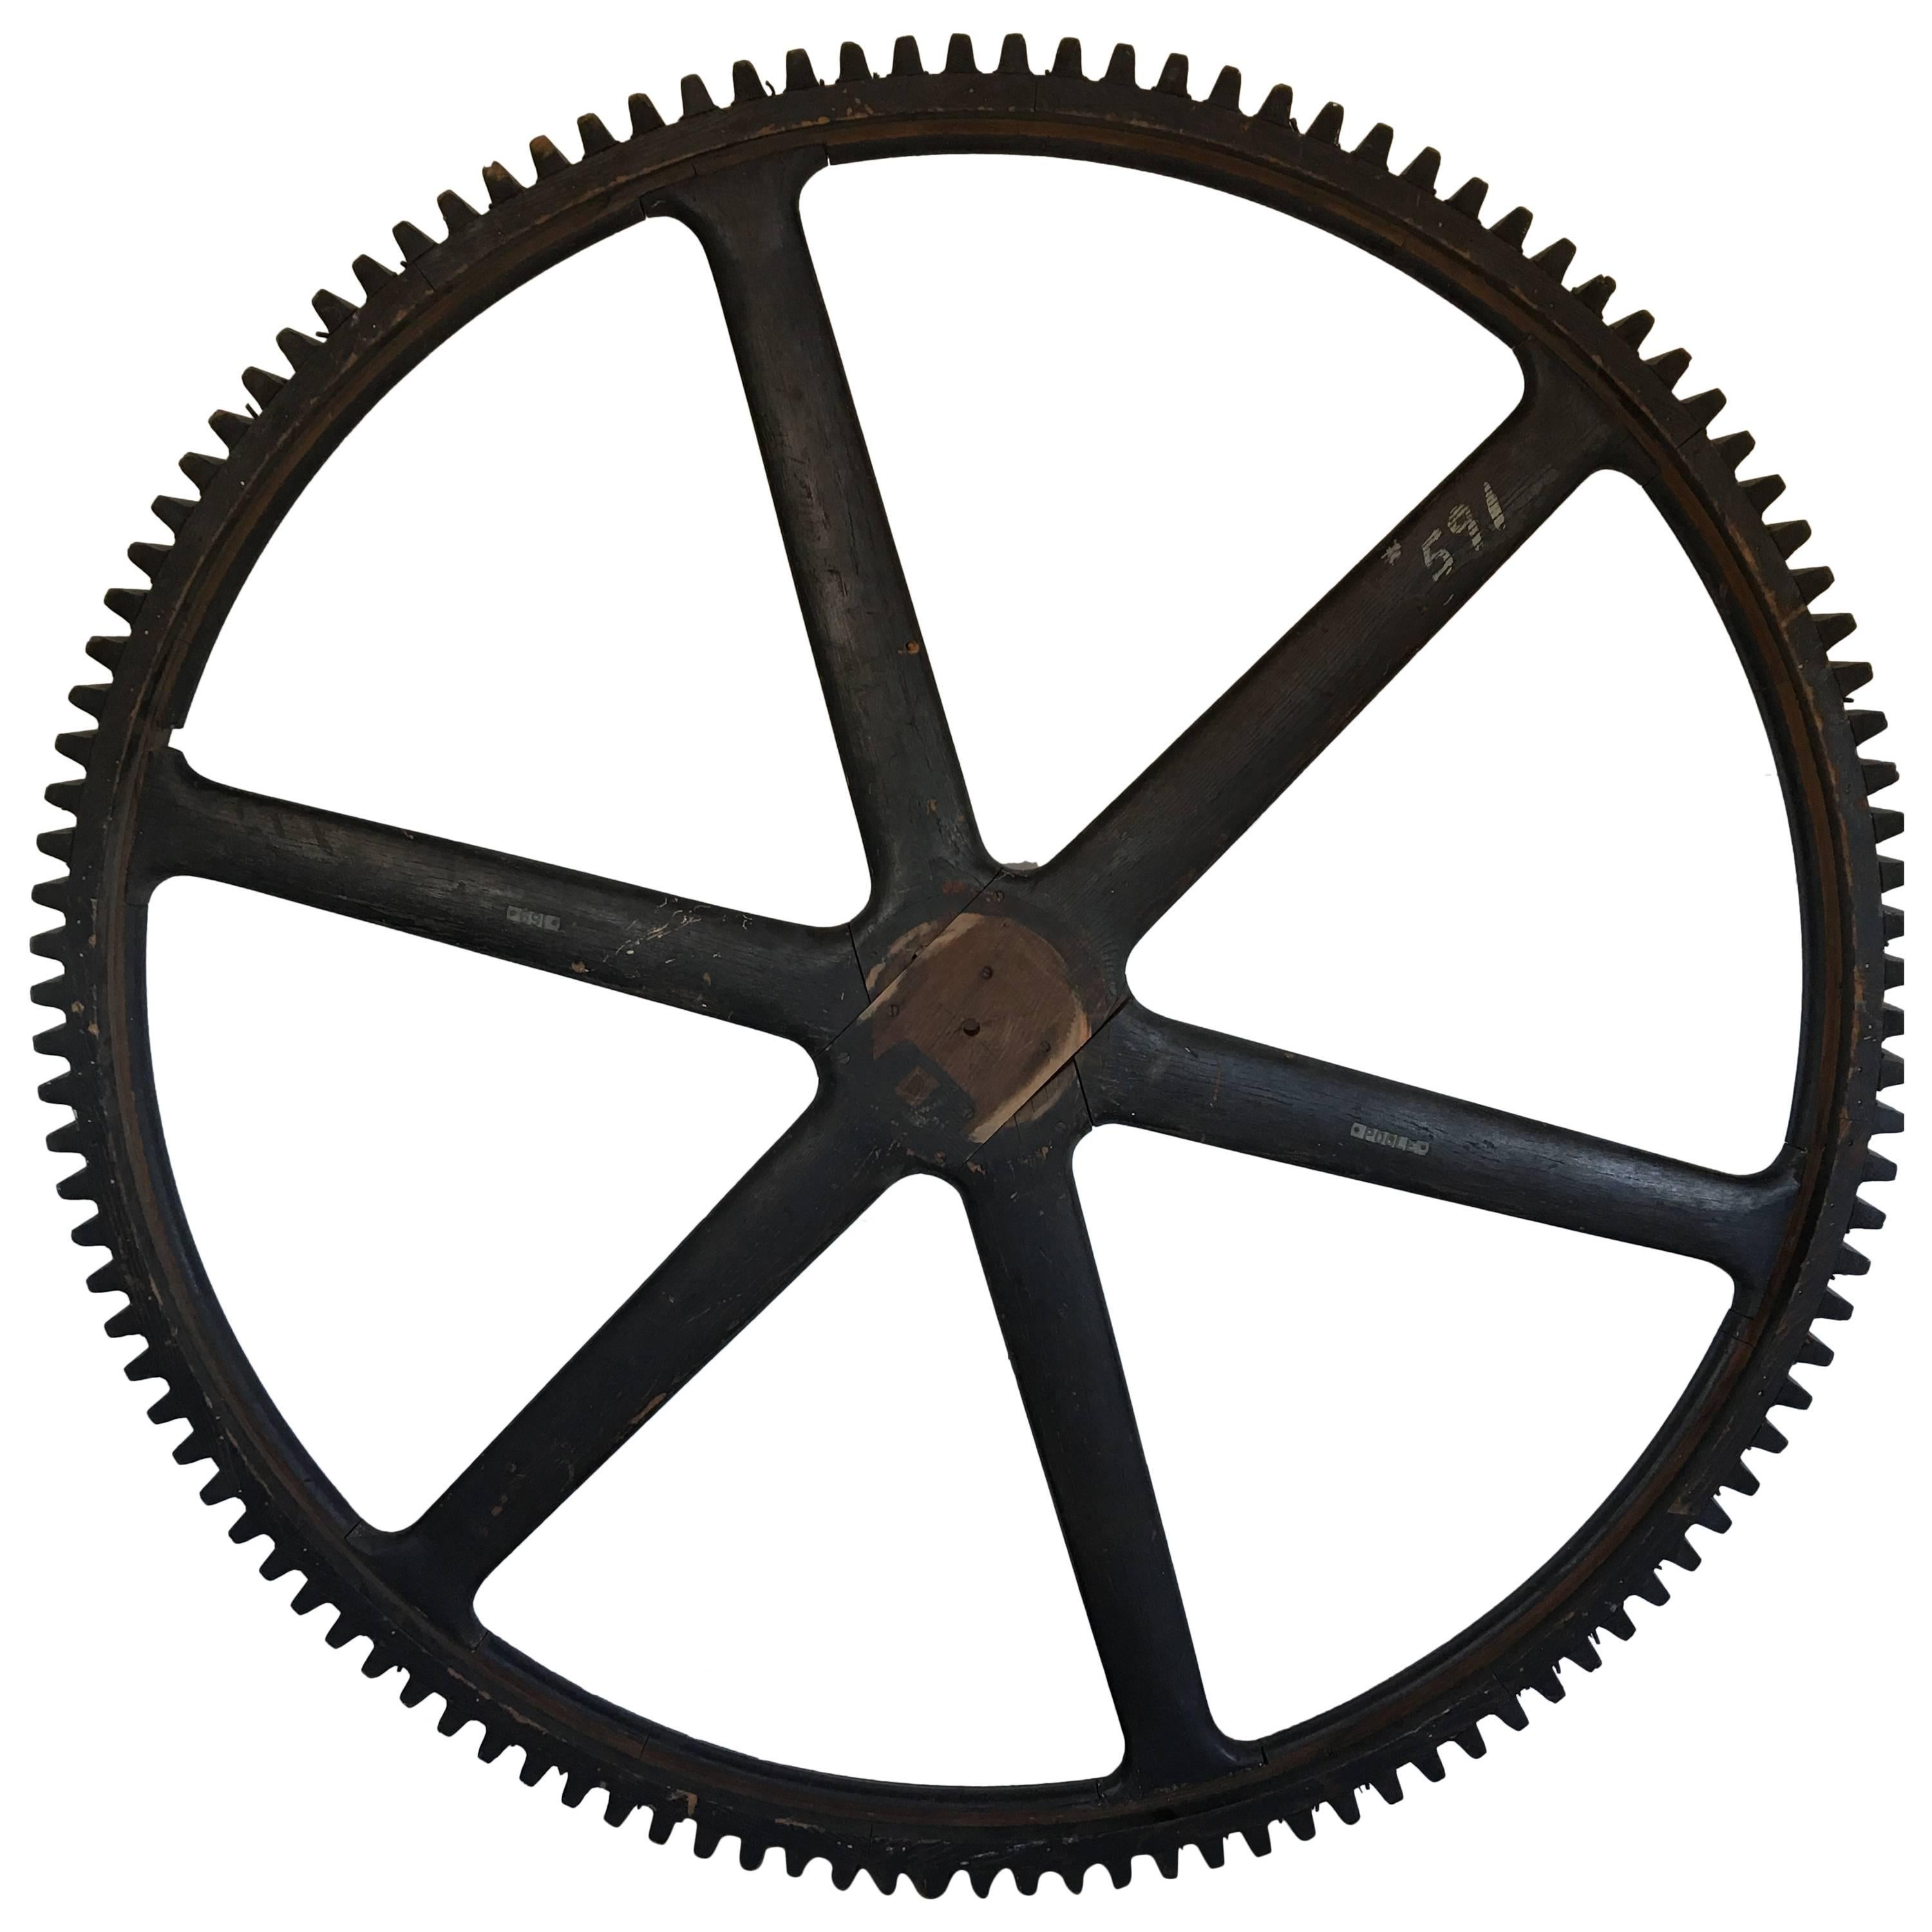 Large Industrial Size Gear Templet, circa 1900